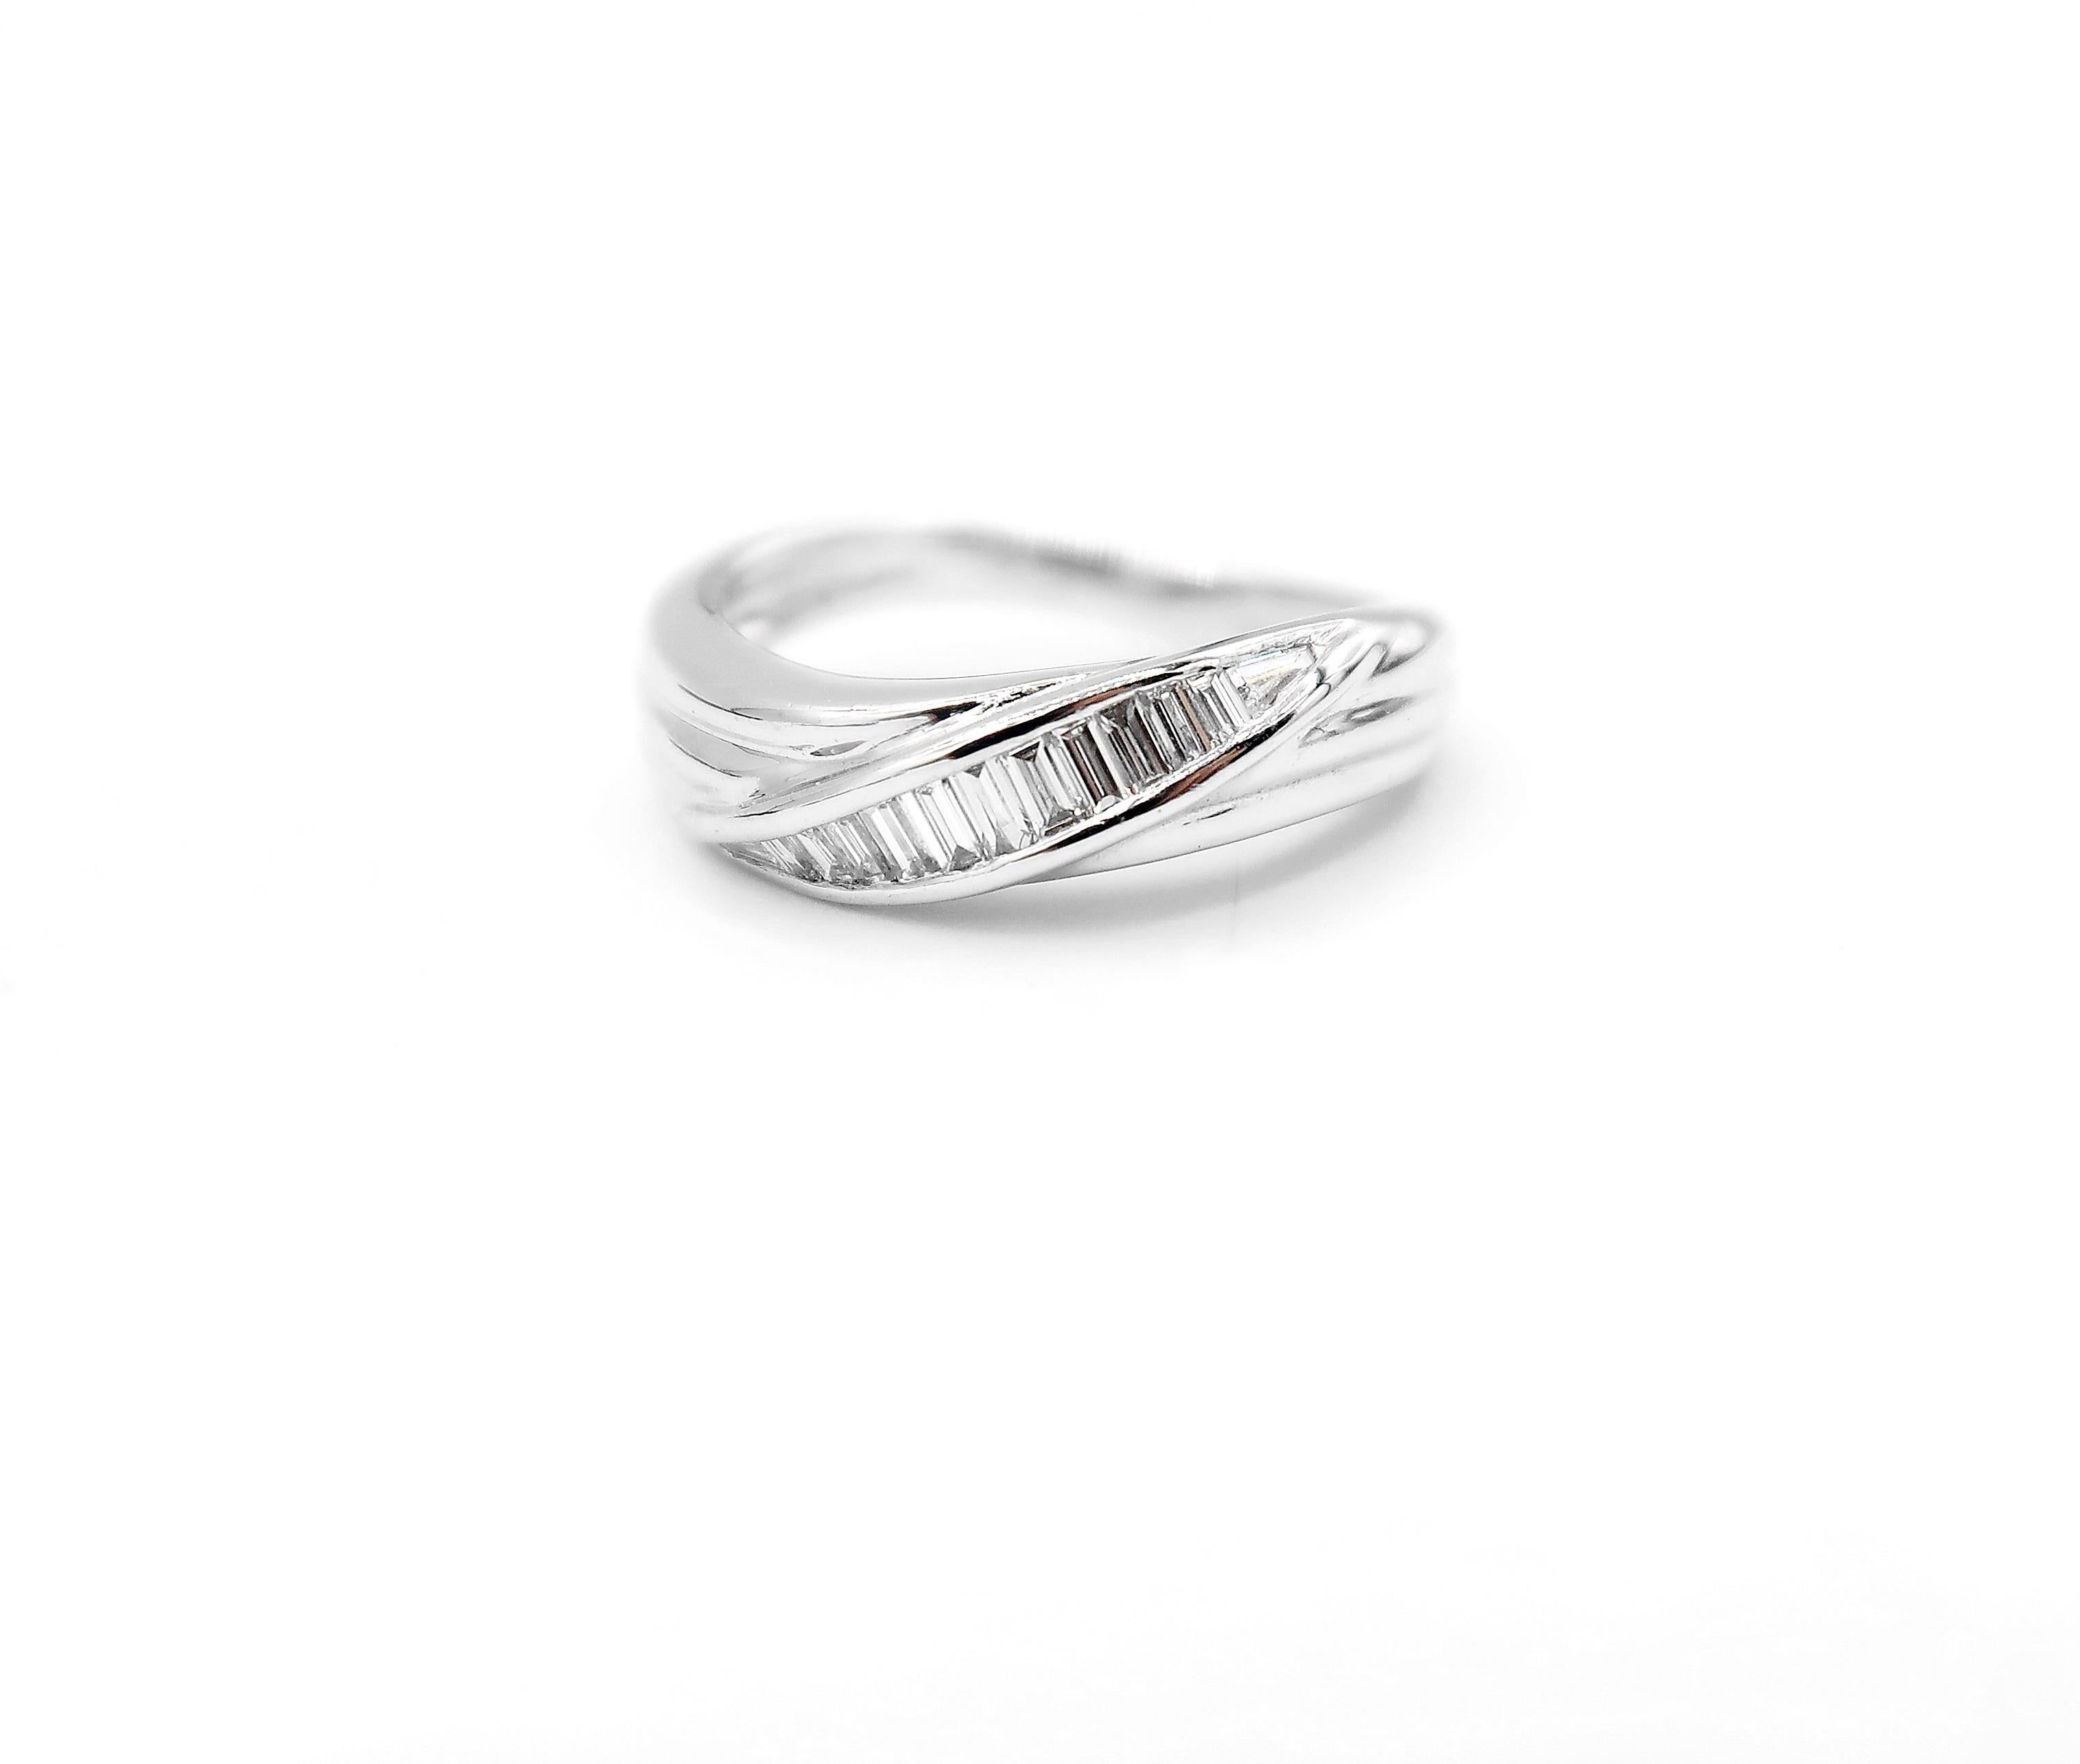 Baguette Diamond Wave Fluted 18 Karat White Gold Band Ring

Please let us know upon checkout should you wish to have the ring resized. 
Ring size: UK I, US 4.5

Gold: 18K 4.158g.
Diamond: 0.48ct.